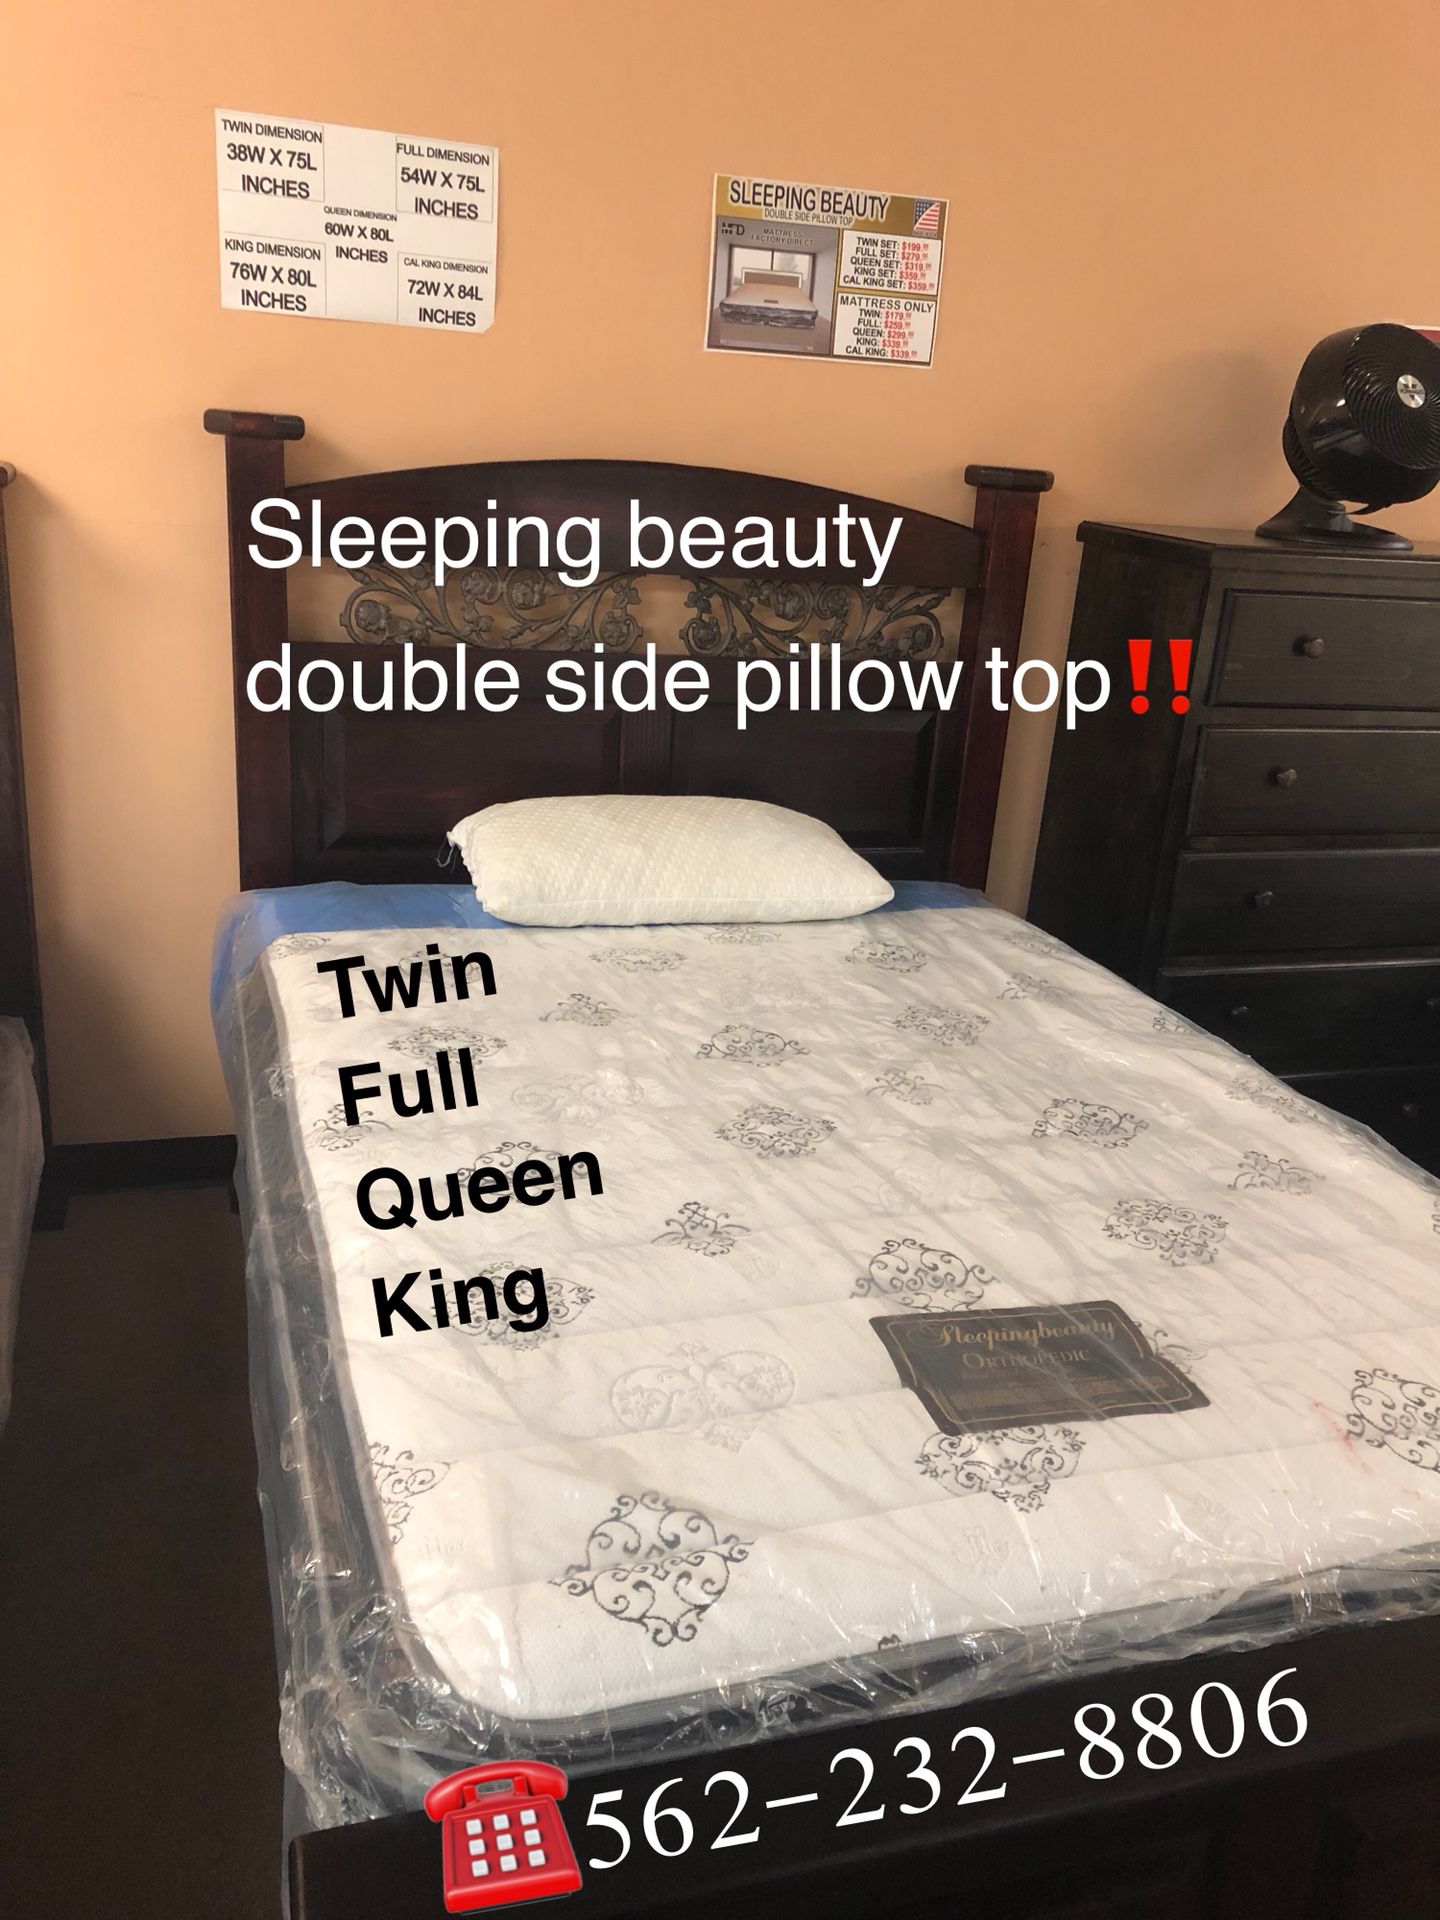 Brand new double sided pillow top mattress and and box spring with bed frame size queen